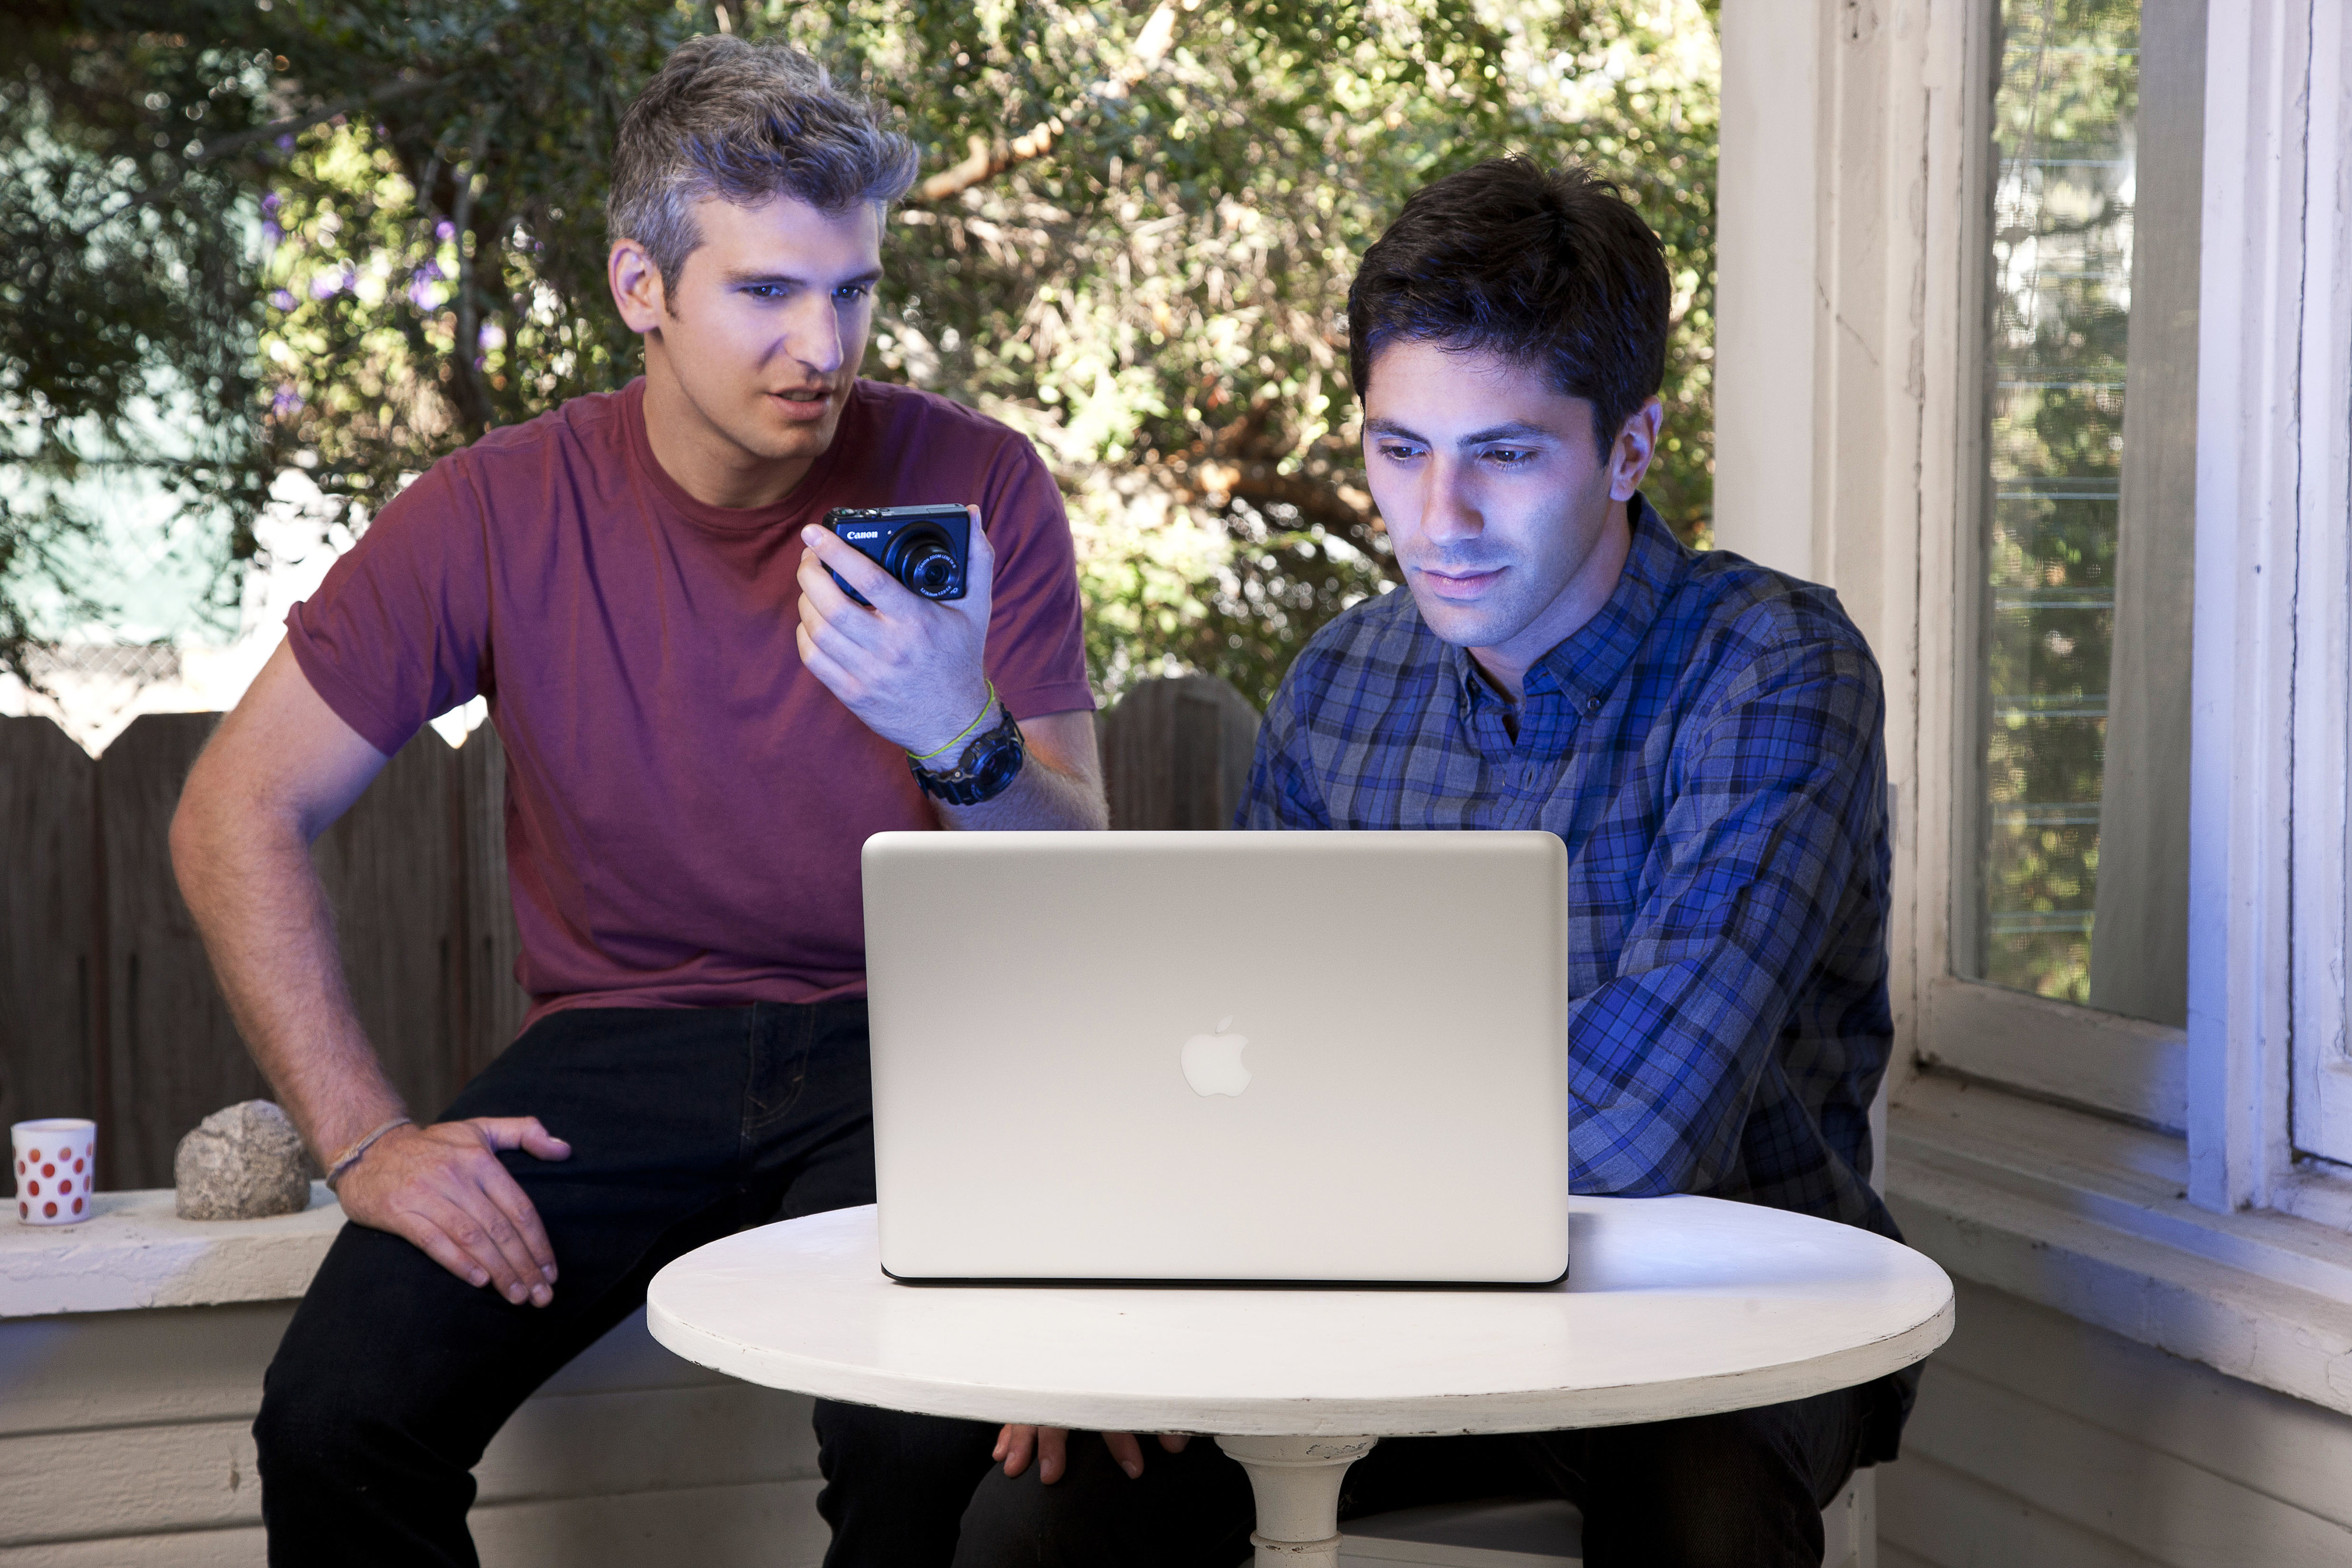 Two men, one with a smartphone, looking intently at a laptop screen on an outdoor patio